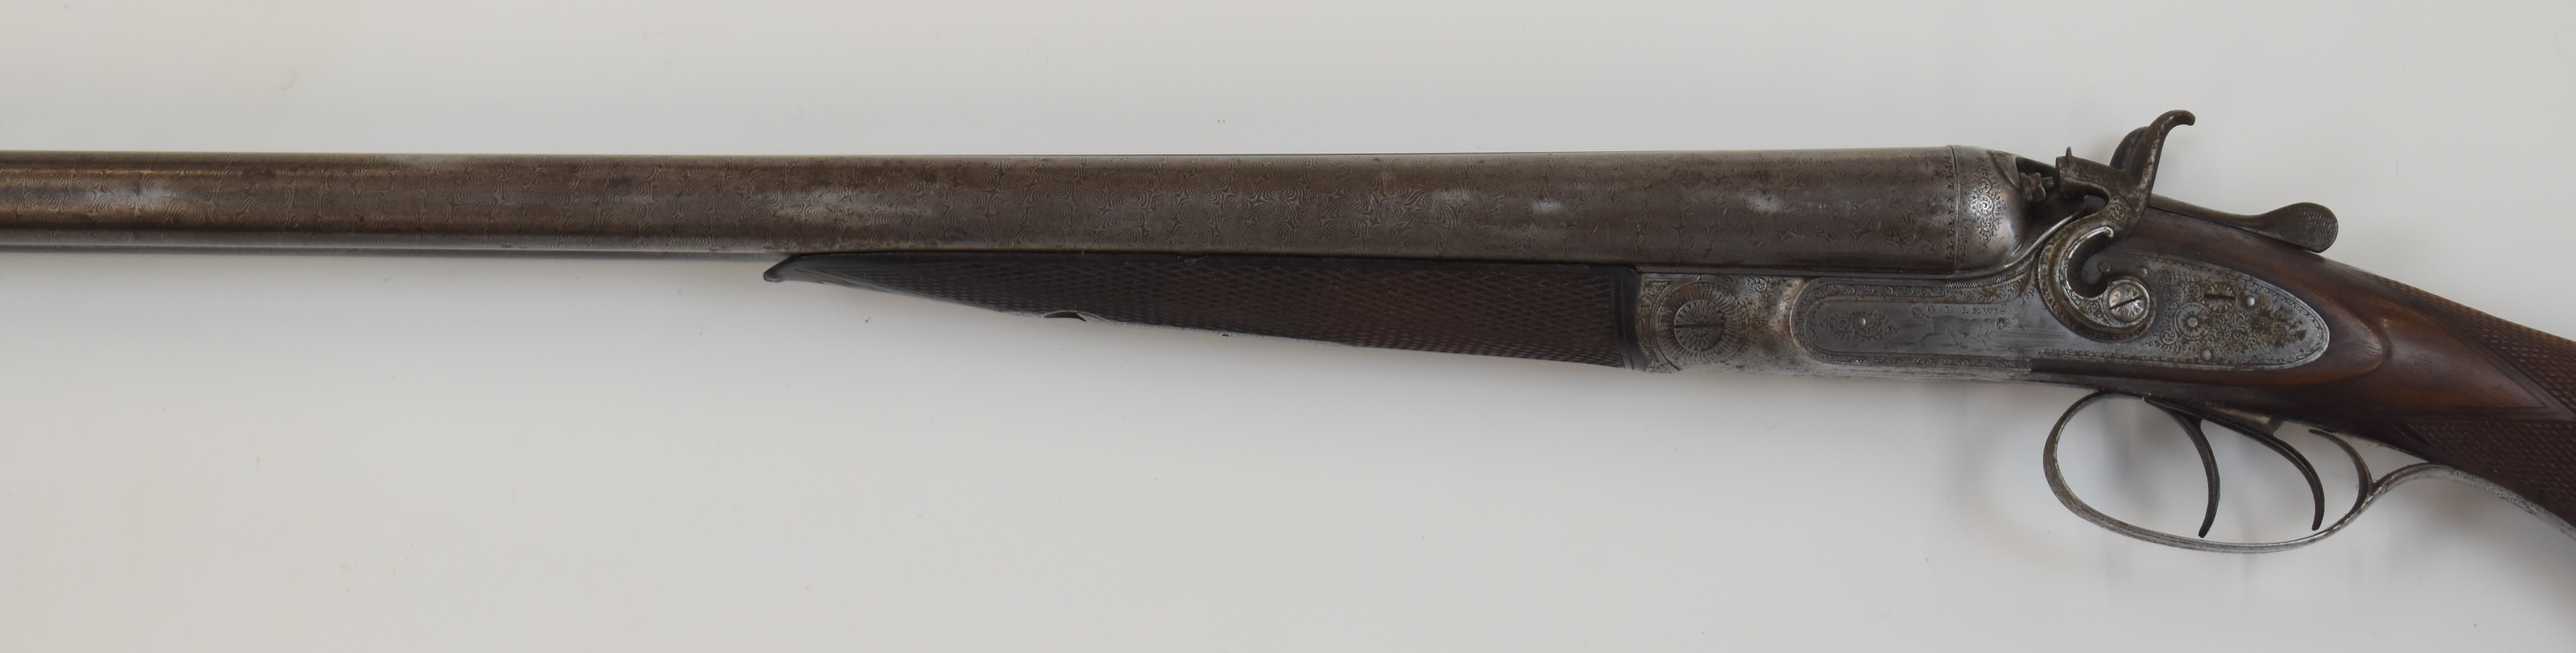 George Edward Lewis 12 bore side by side hammer action shotgun with named and engraved locks, - Image 12 of 13